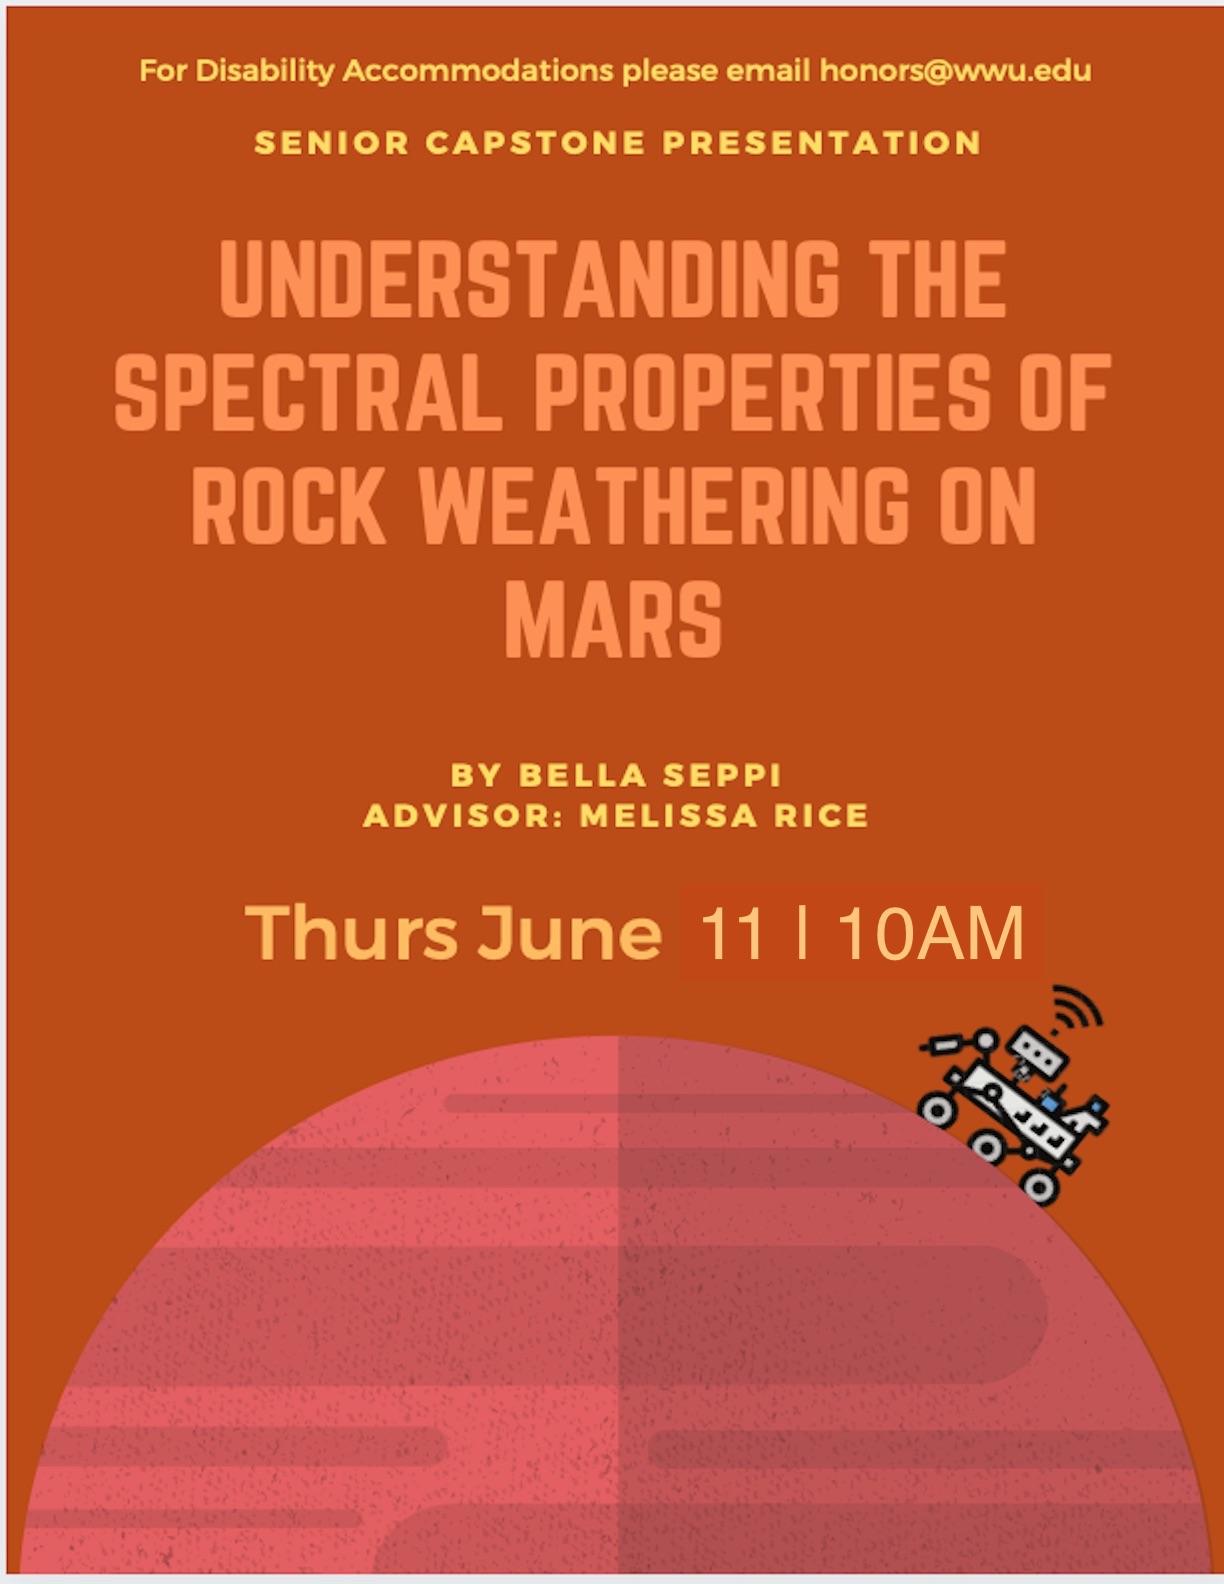 Image: Clip art image of Mars with the Mars Rover on top of it. Text: "For Disability Accommodations please email honors@wwu.edu. Senior Capstone Presentation. Understanding the Spectral Properties of Rock Weathering on Mars. By Bella Seppi, Advisor: Melissa Rice. Thurs June 11, 10 AM."